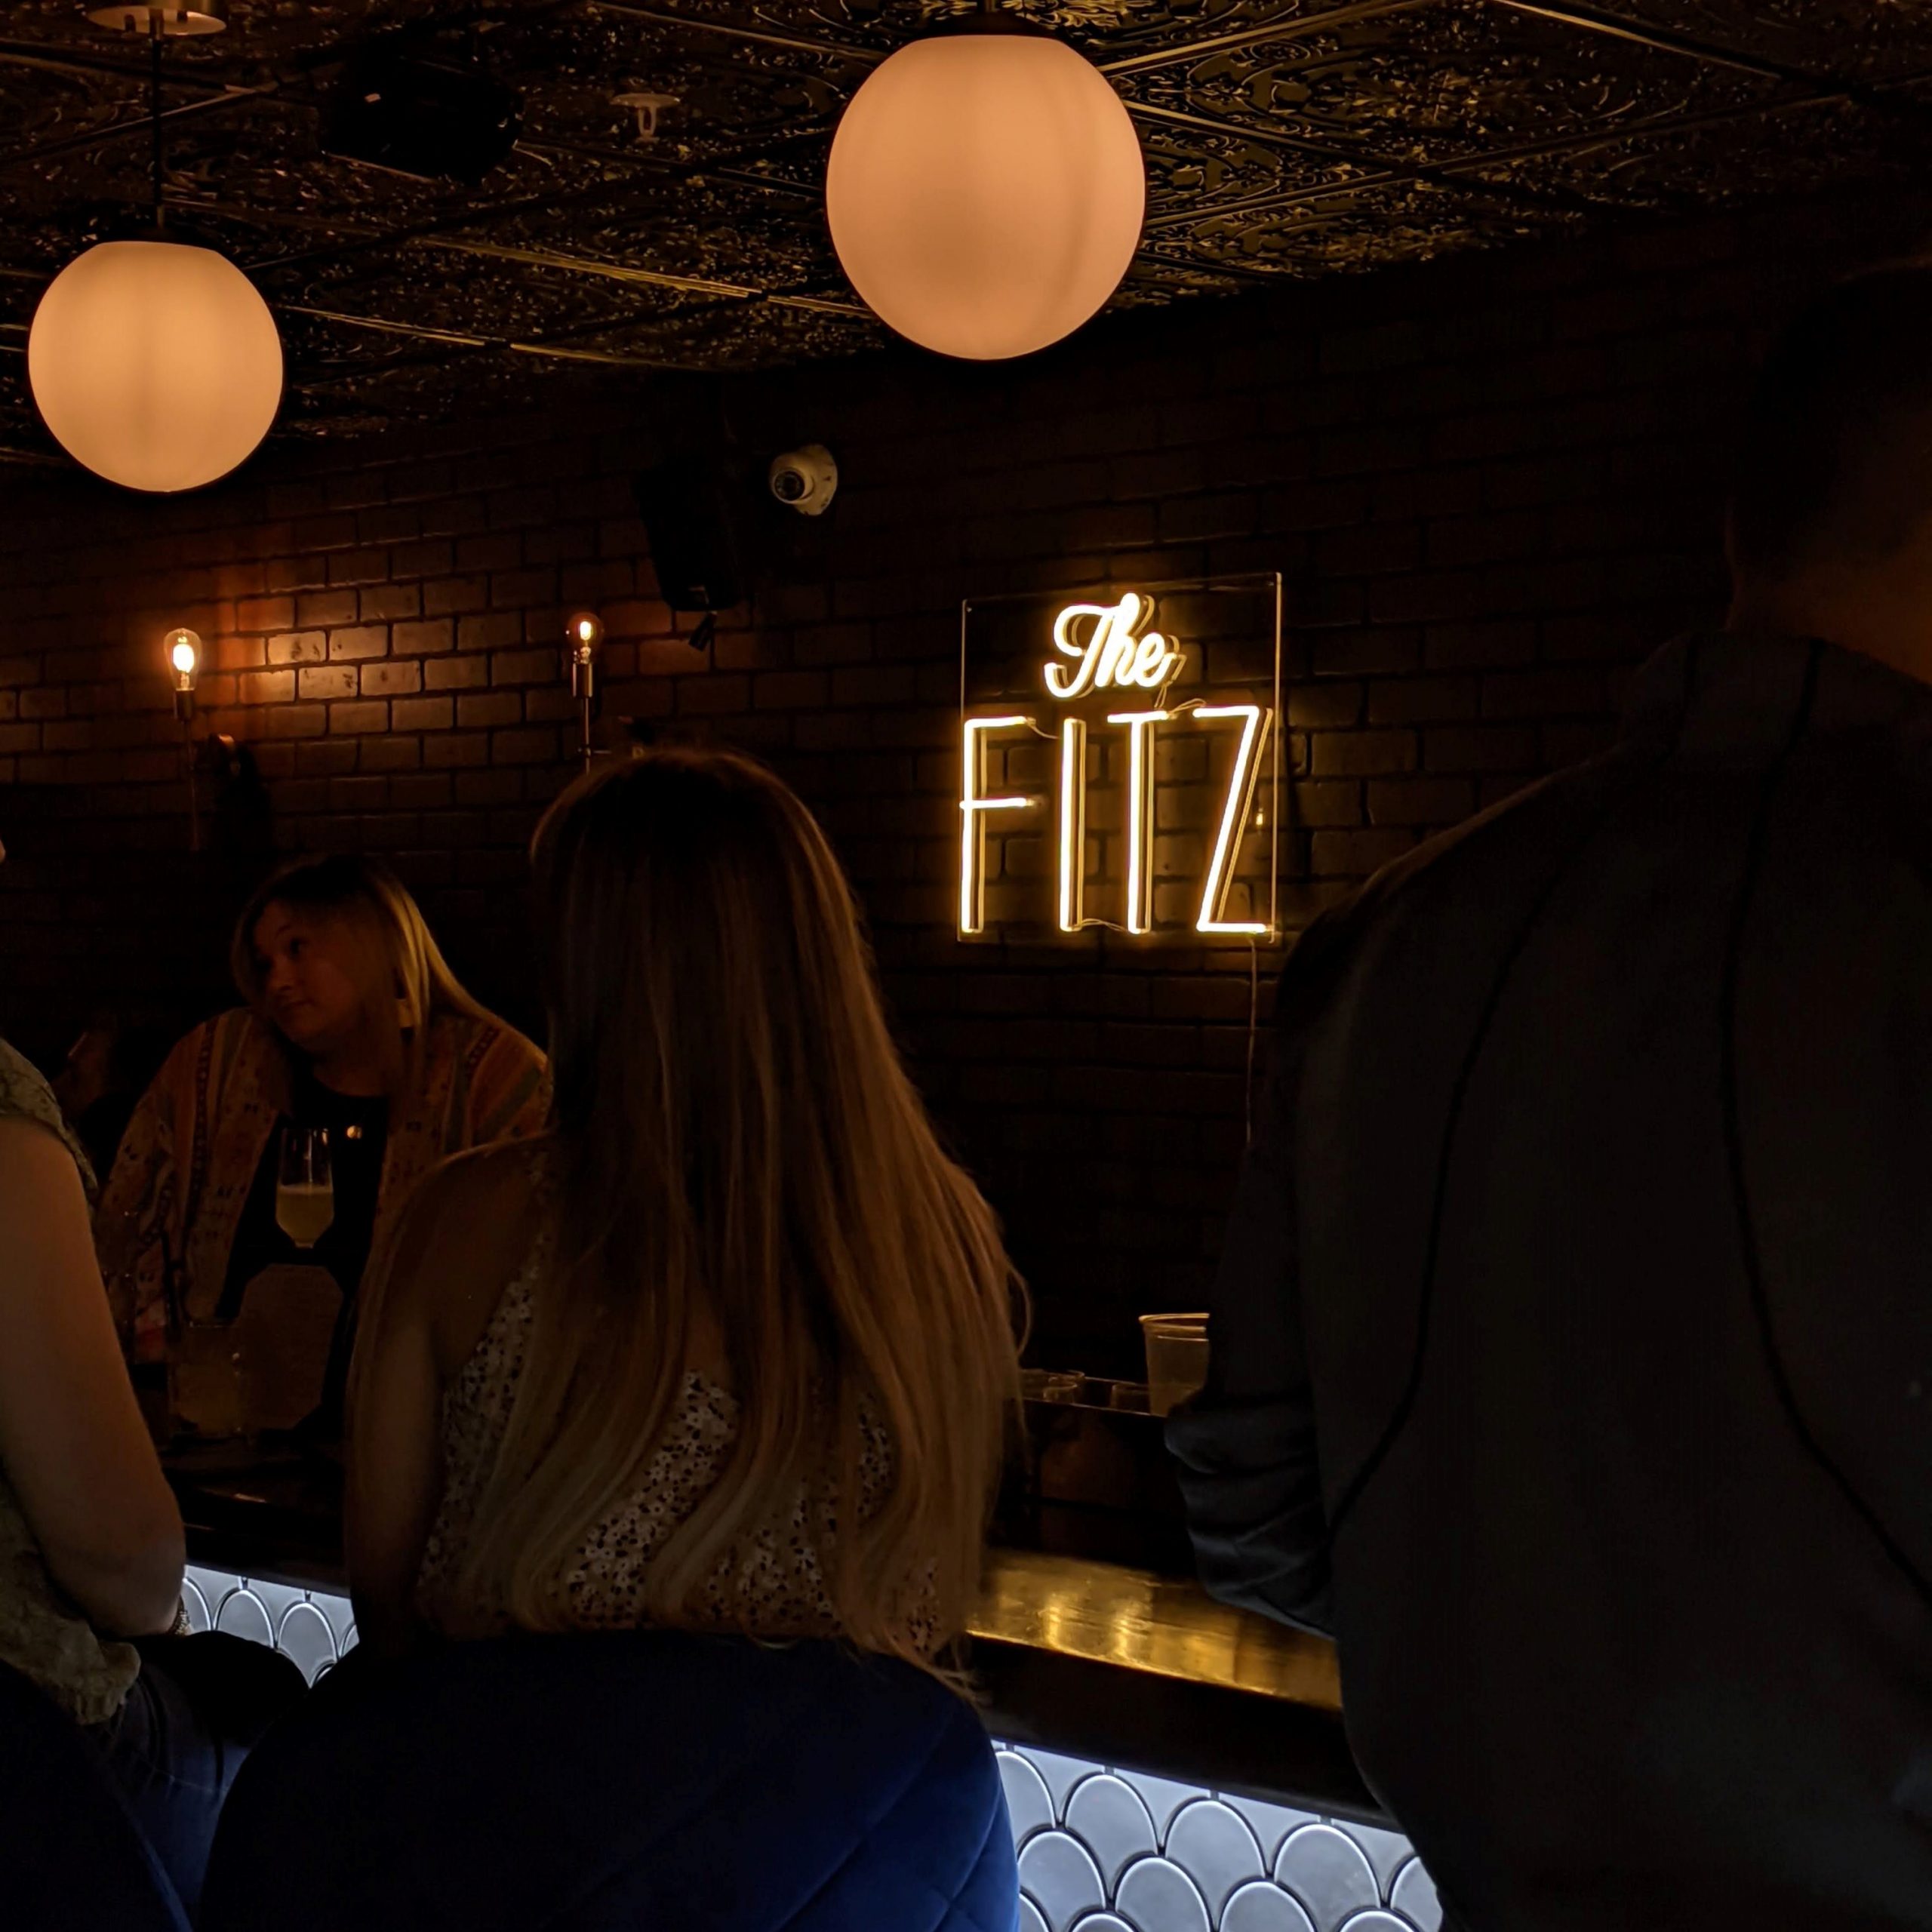 People gather around the bar of the modern speakeasy The Fitz lit by round lamps and a neon sign with the bar's logo.